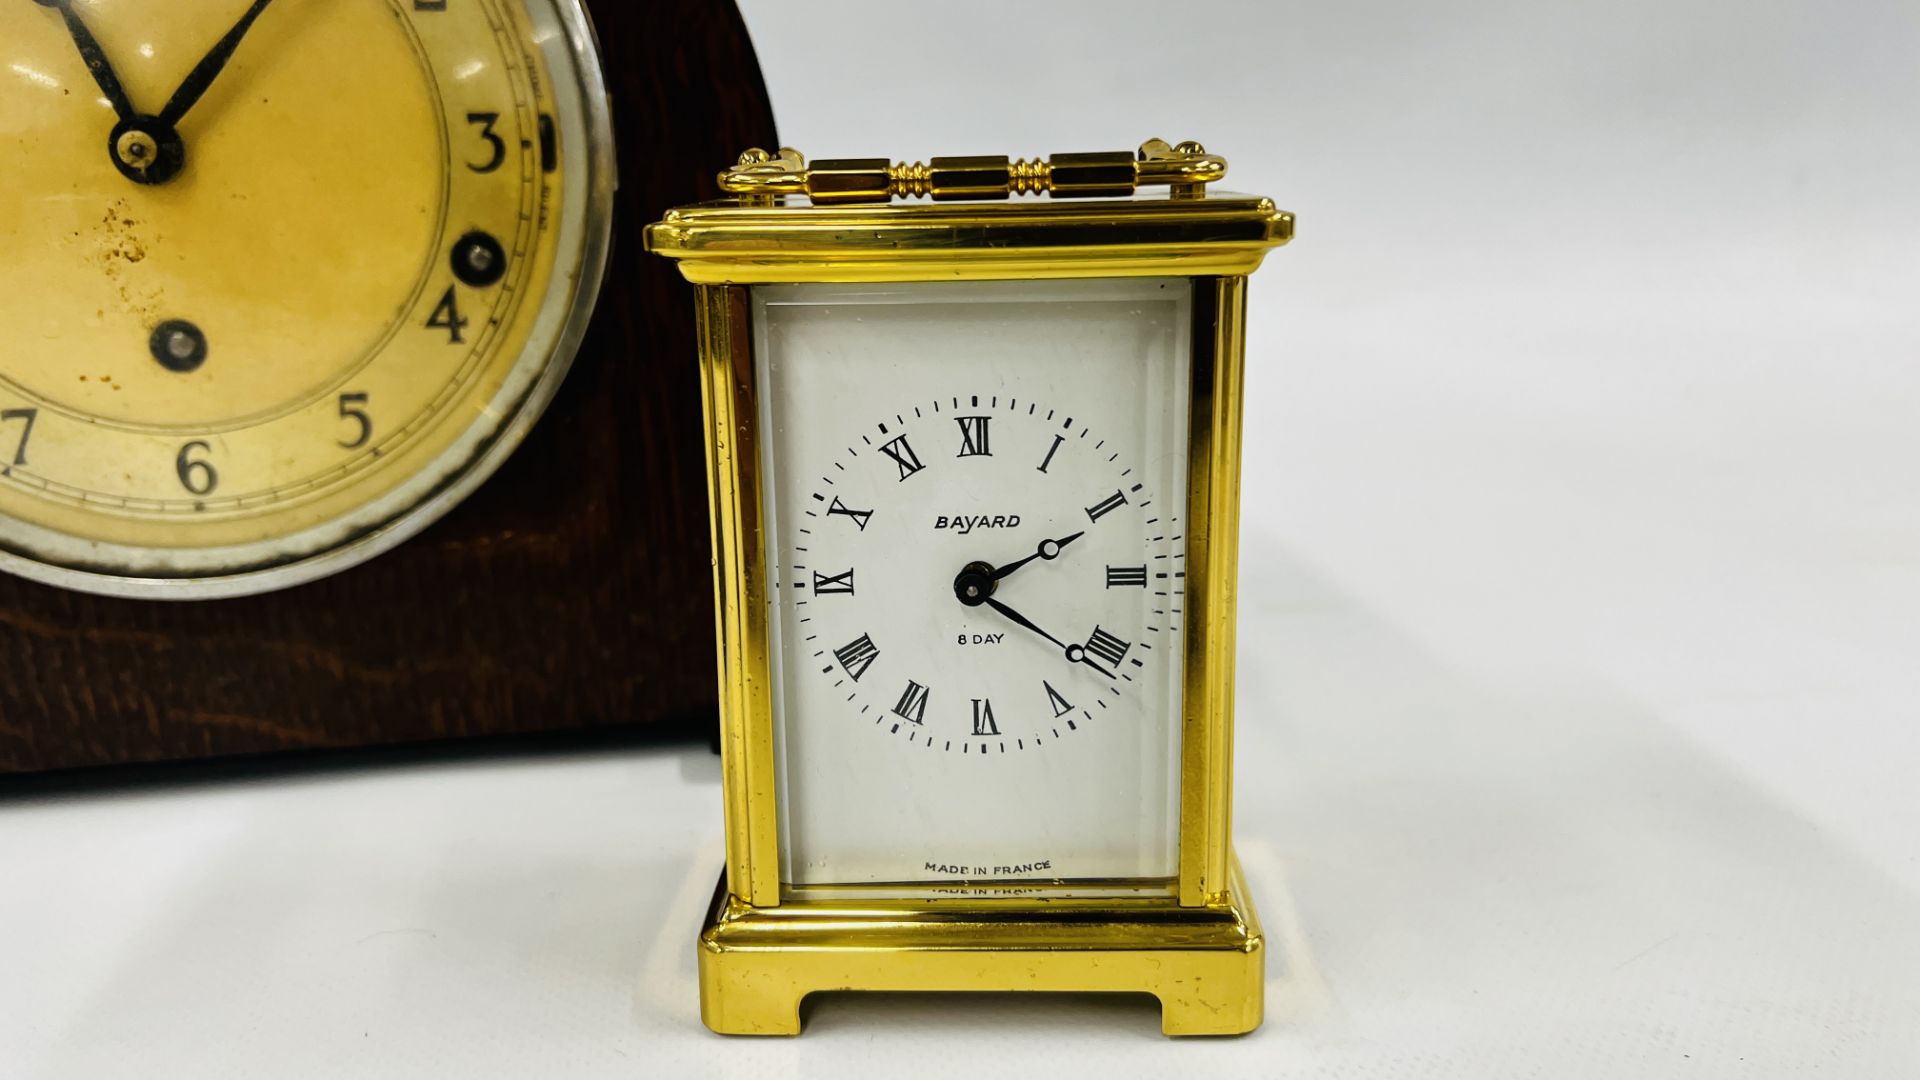 A GARROD 8 DAY MANTEL CLOCK ALONG WITH AN 8 DAY CARRIAGE CLOCK. - Image 2 of 7